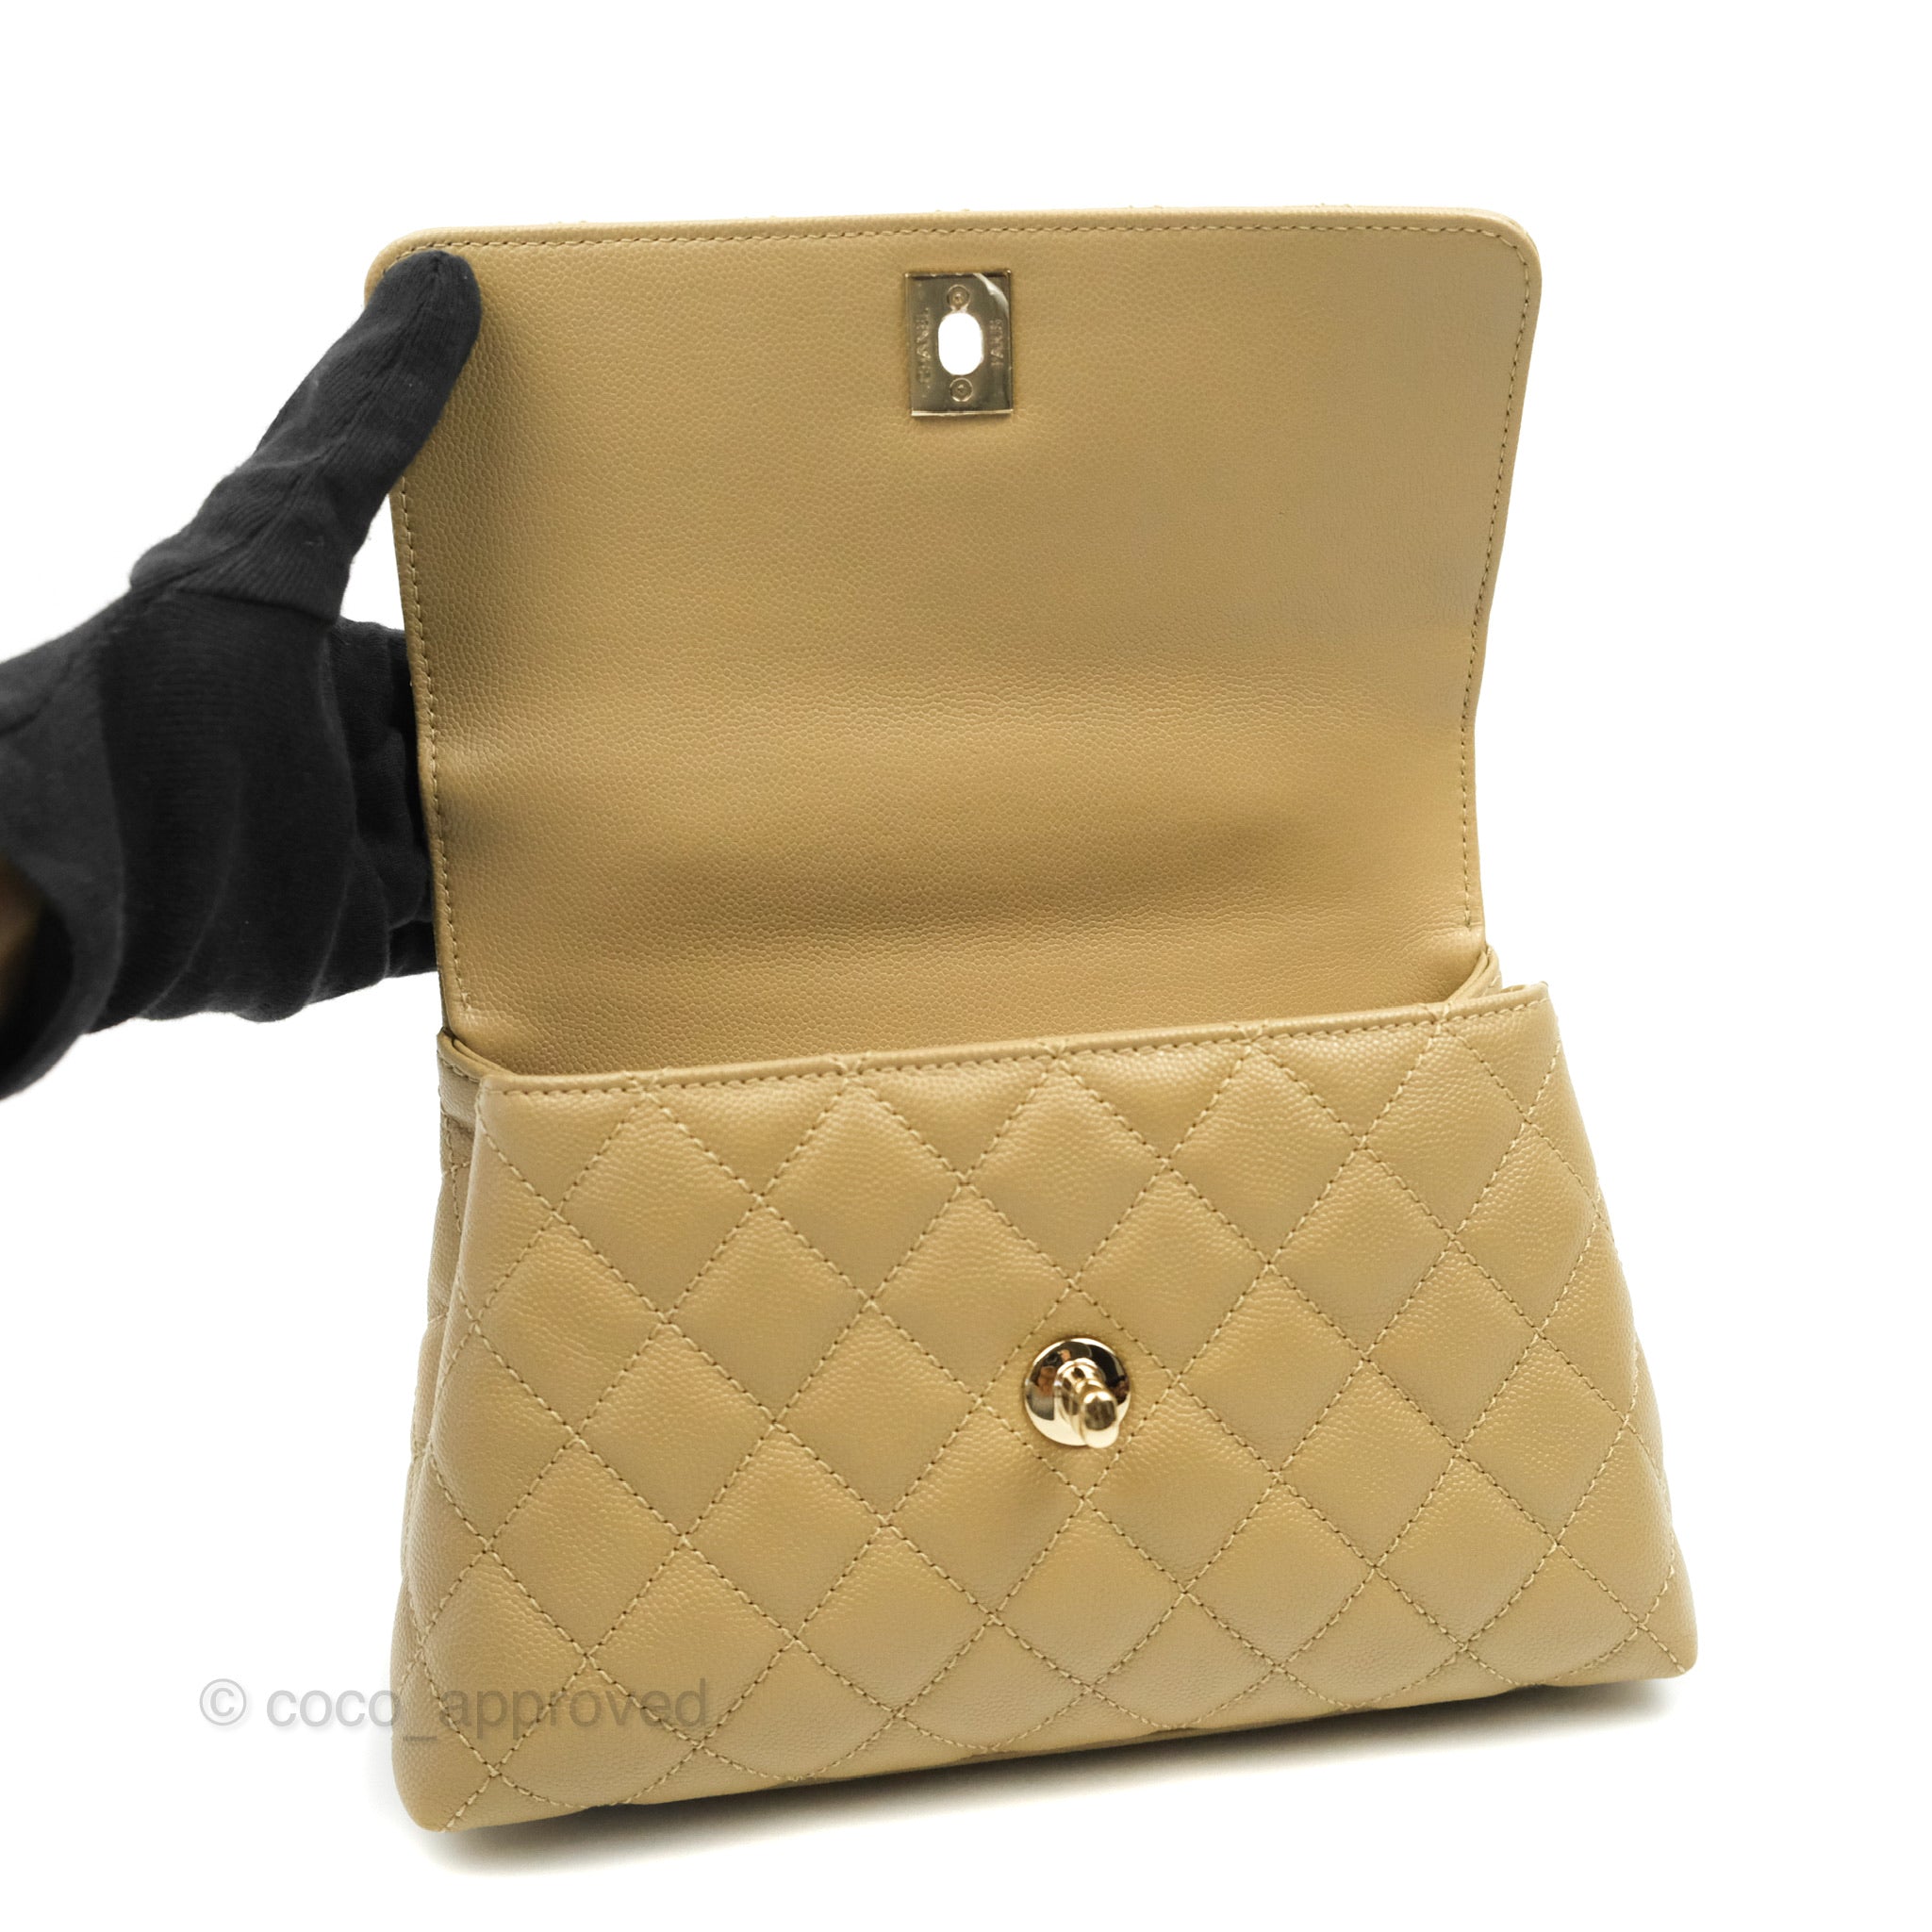 Chanel Small Coco Handle Quilted Dark Beige Caviar Gold Hardware